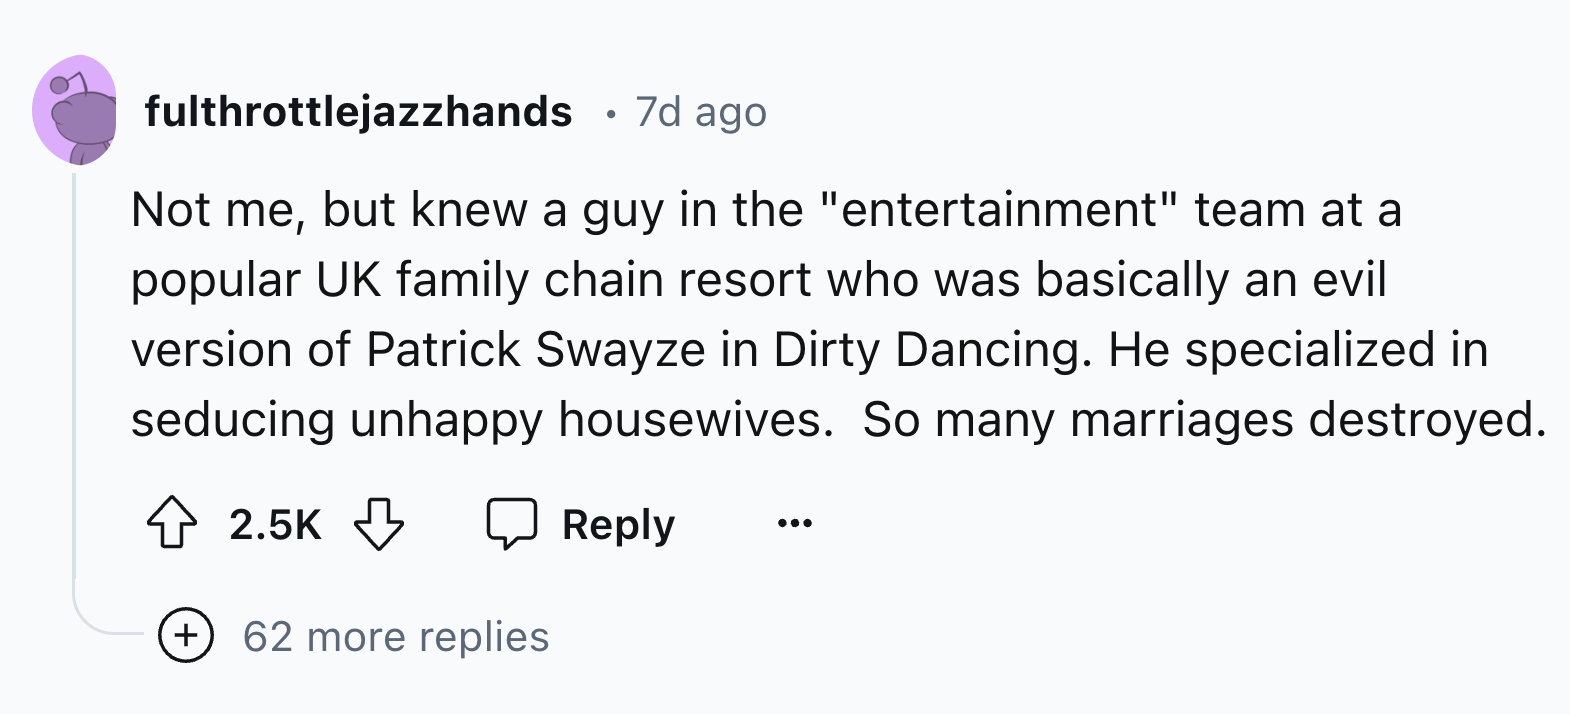 number - fulthrottlejazzhands 7d ago Not me, but knew a guy in the "entertainment" team at a popular Uk family chain resort who was basically an evil version of Patrick Swayze in Dirty Dancing. He specialized in seducing unhappy housewives. So many marria